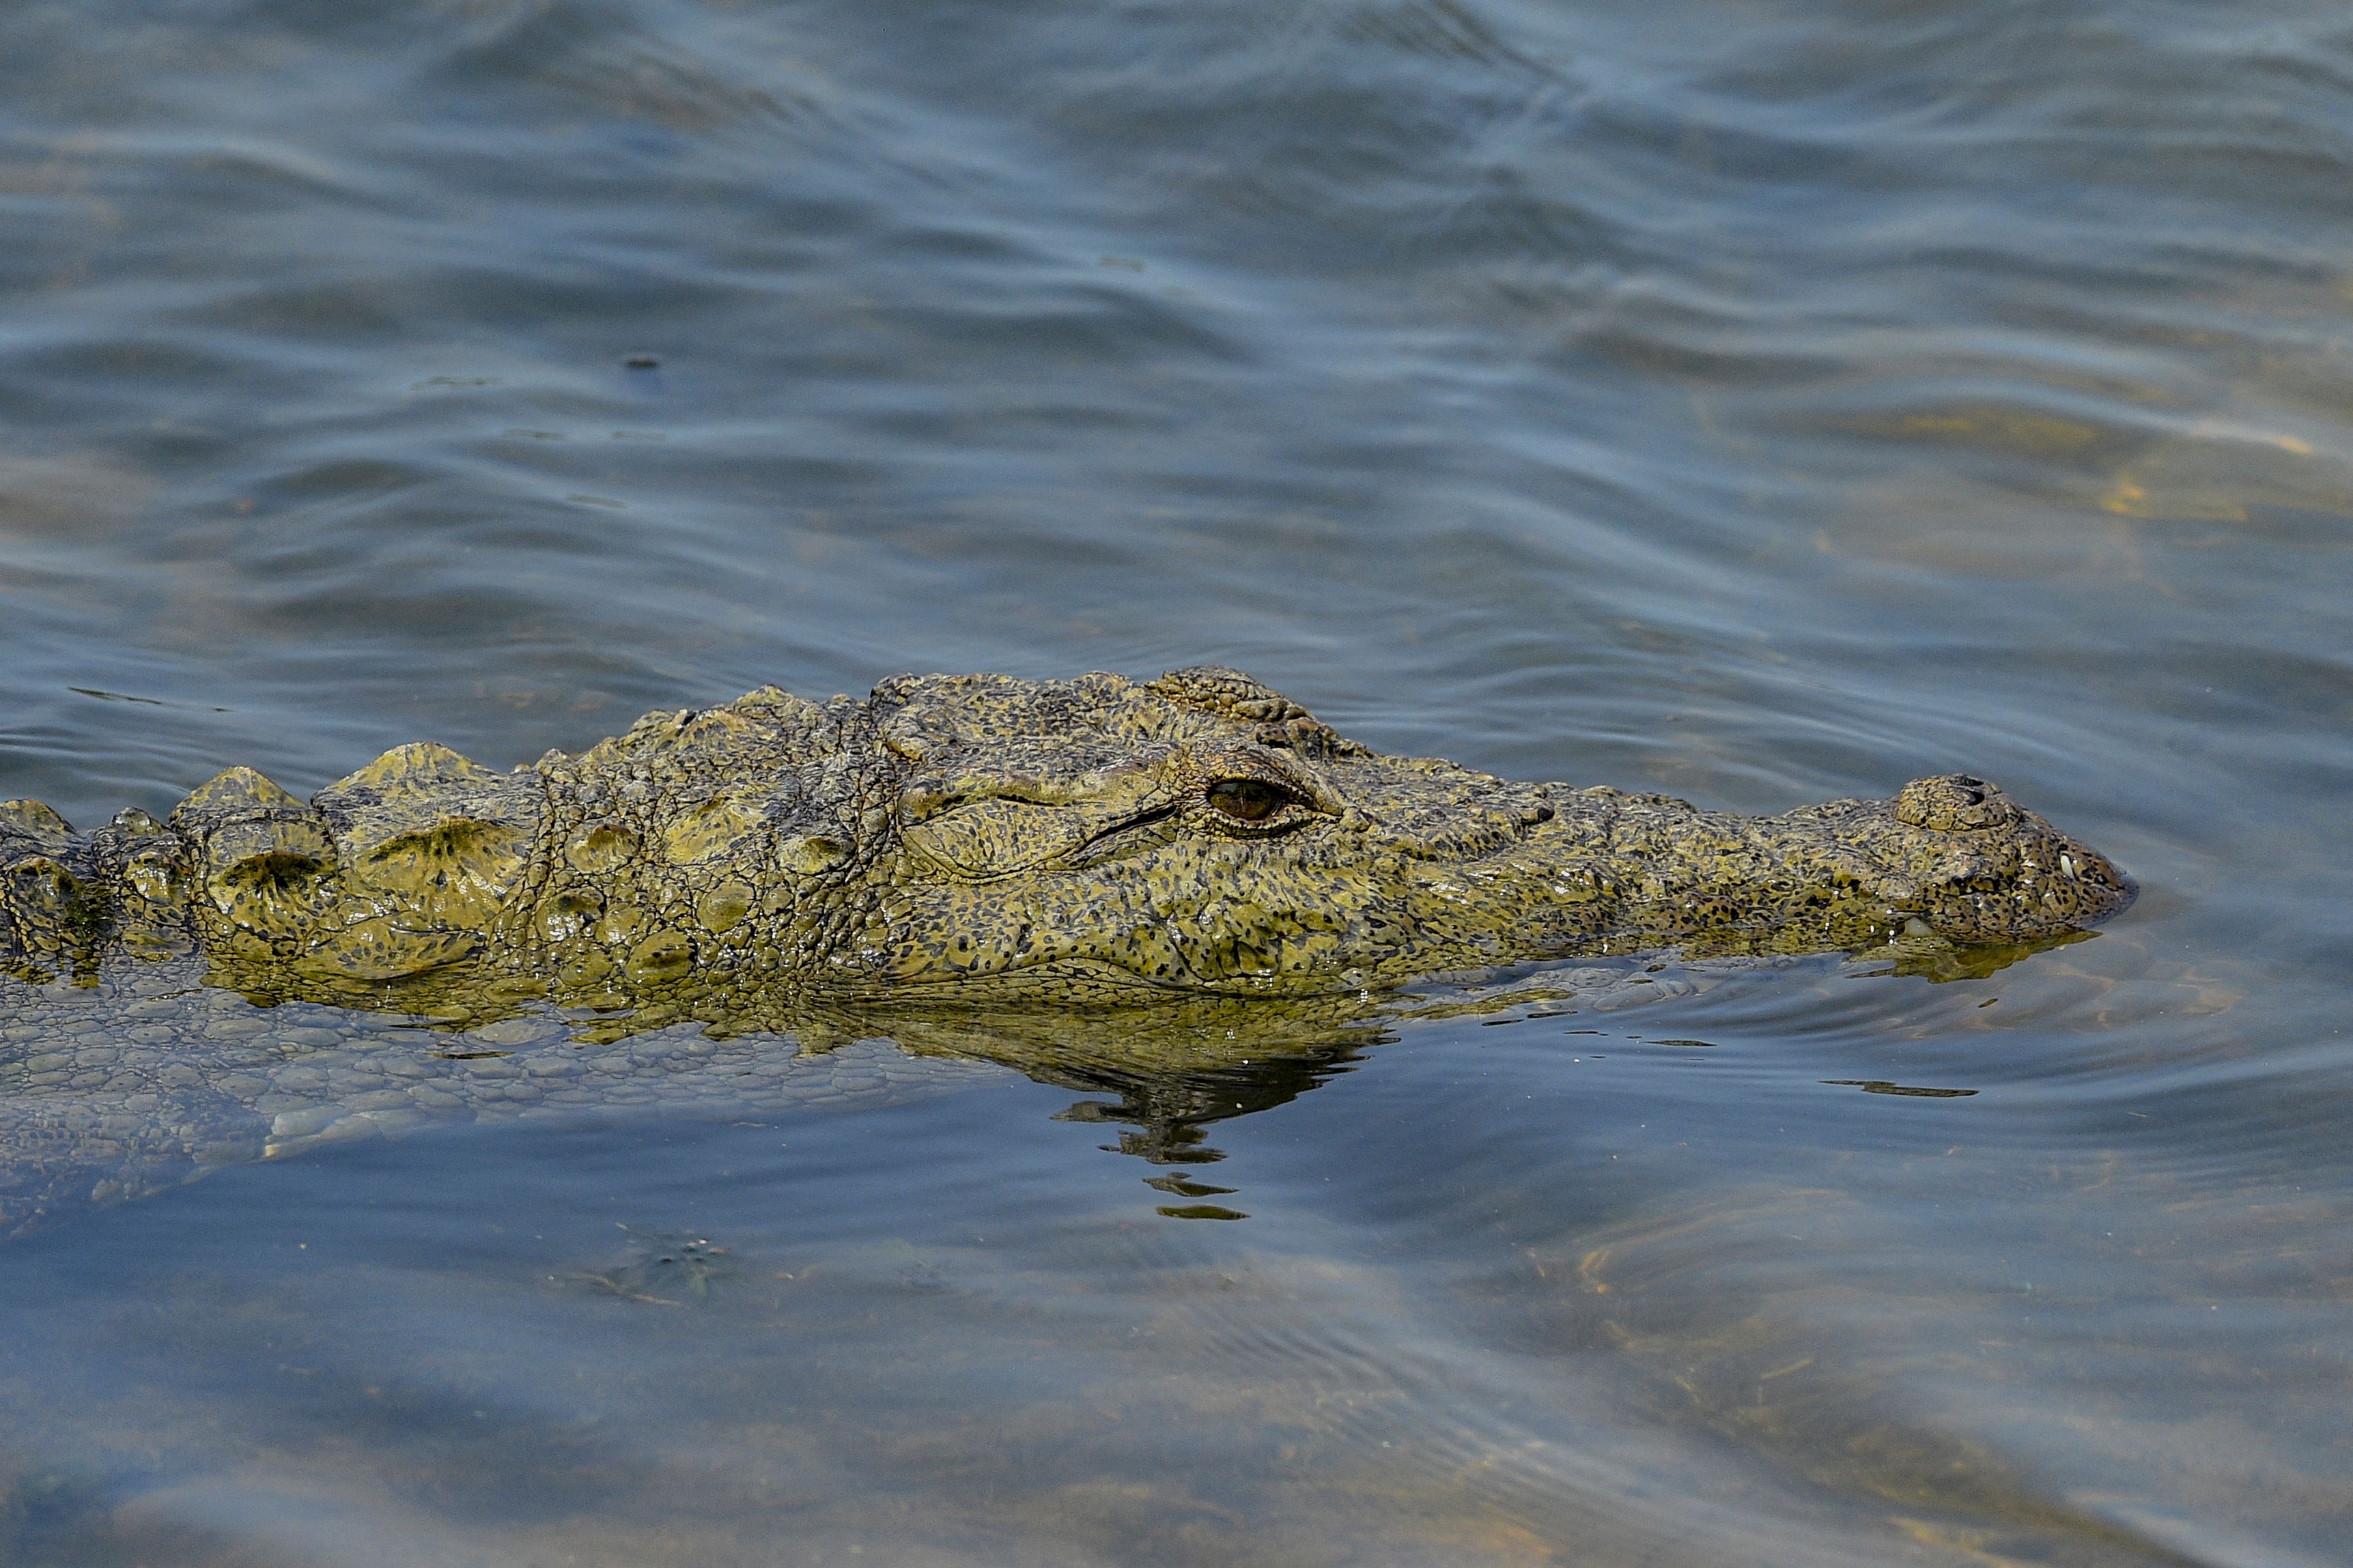 12-year-old gets attacked, dragged by crocodile on family vacation in Cancun